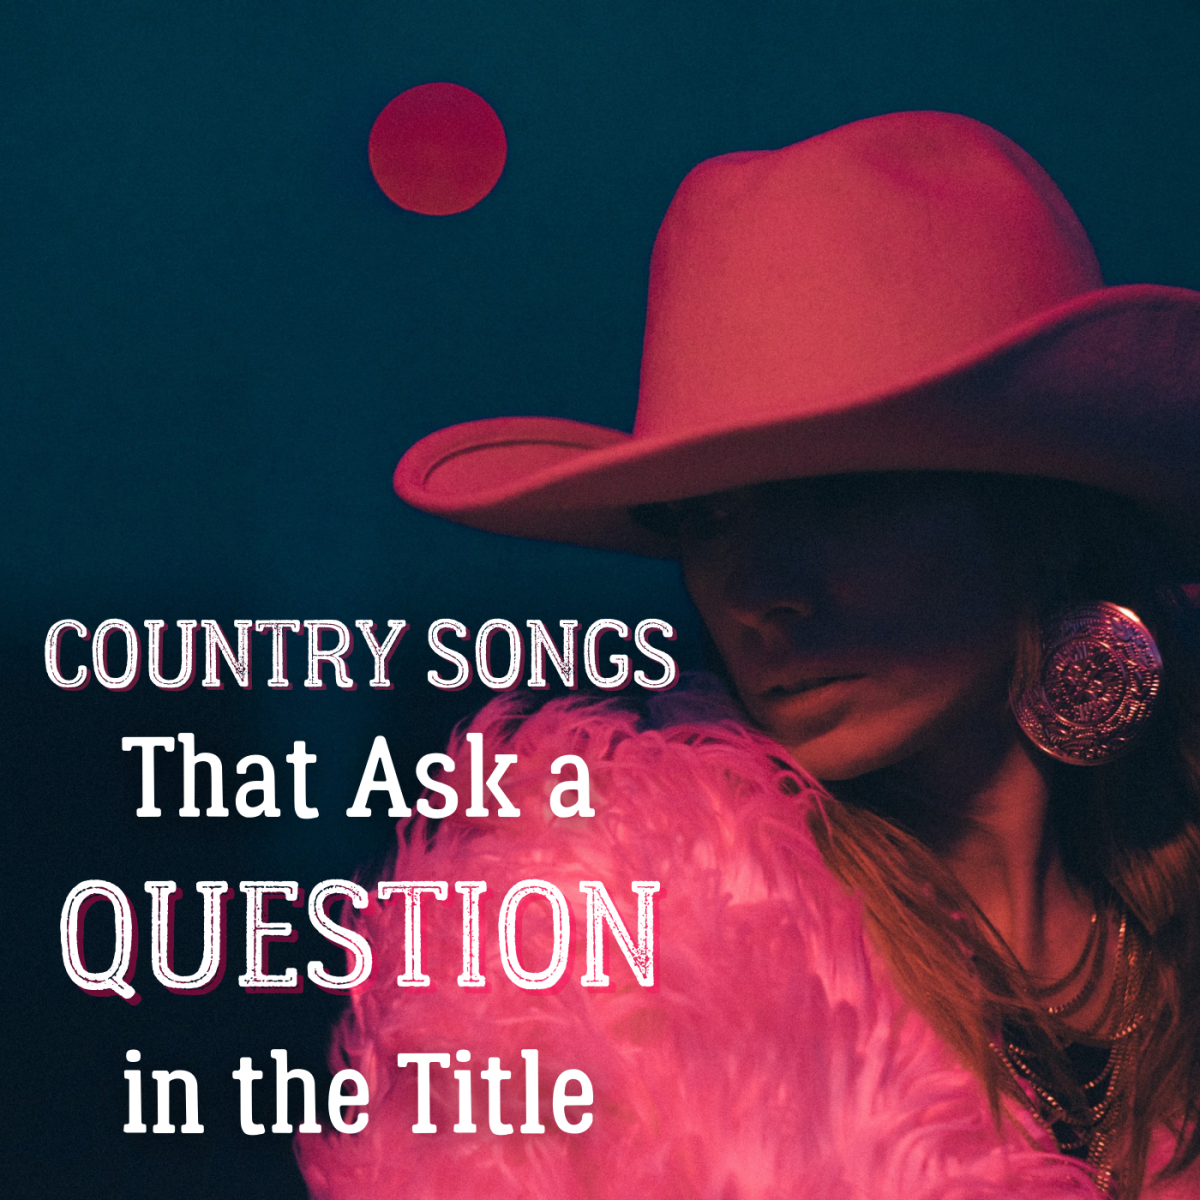 161 Country Songs That Ask a Question in the Title